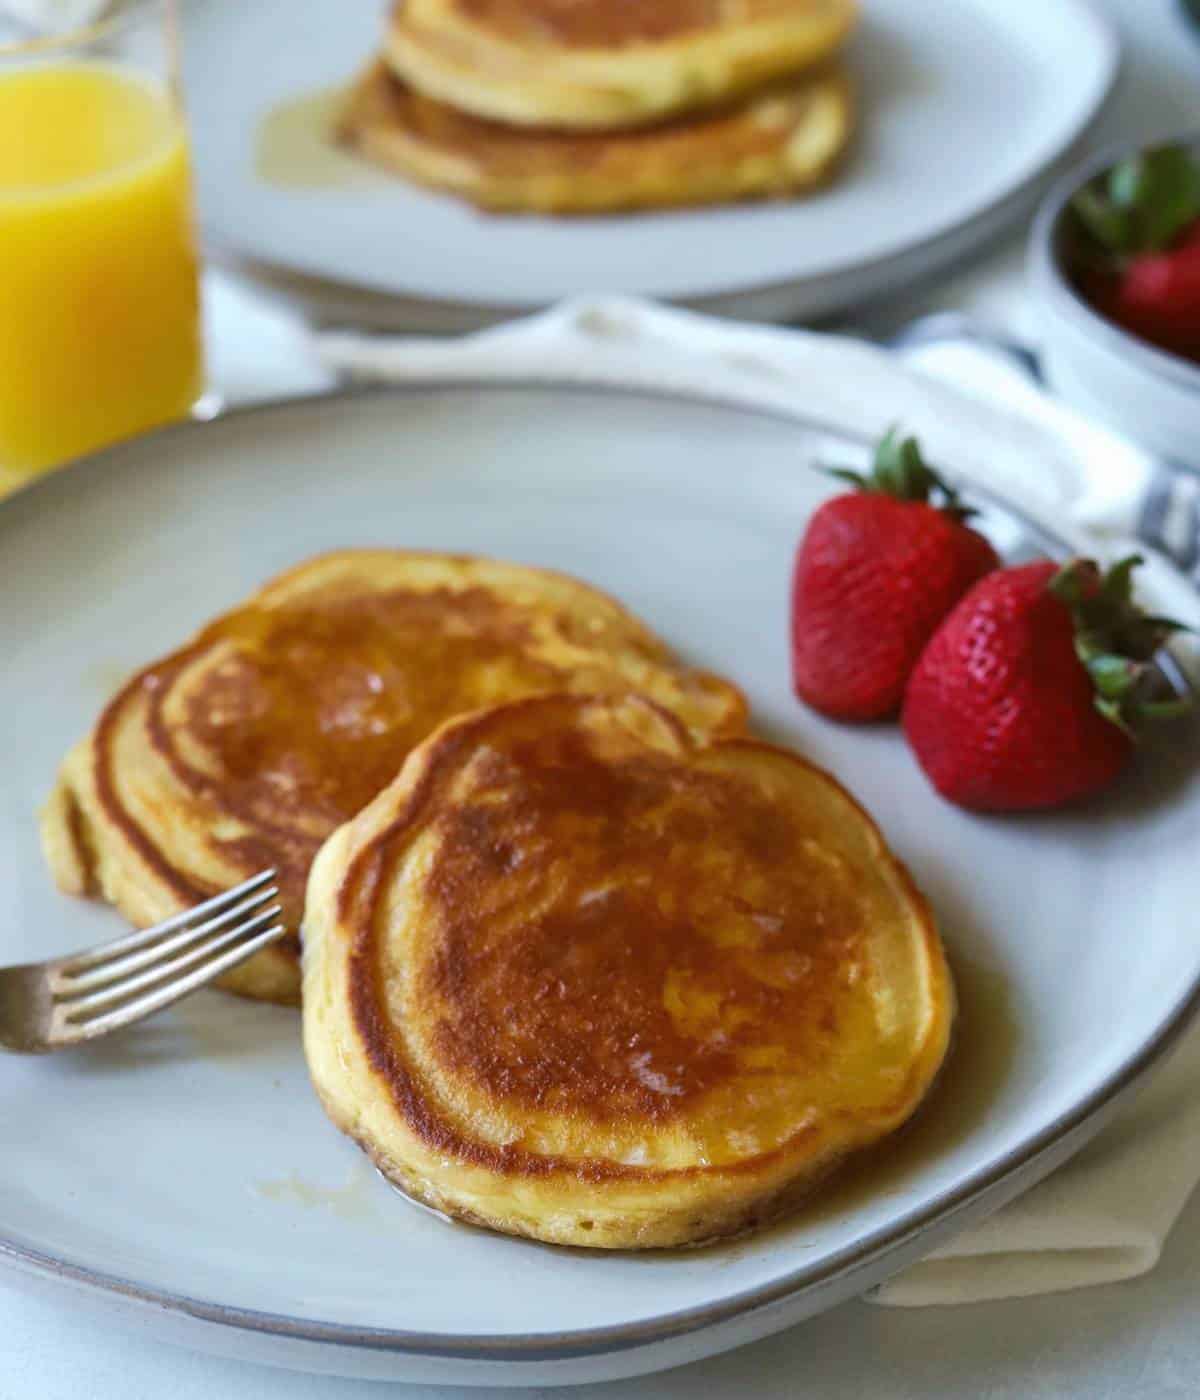 Pancakes covered in syrup on a gray plate with side of strawberries.